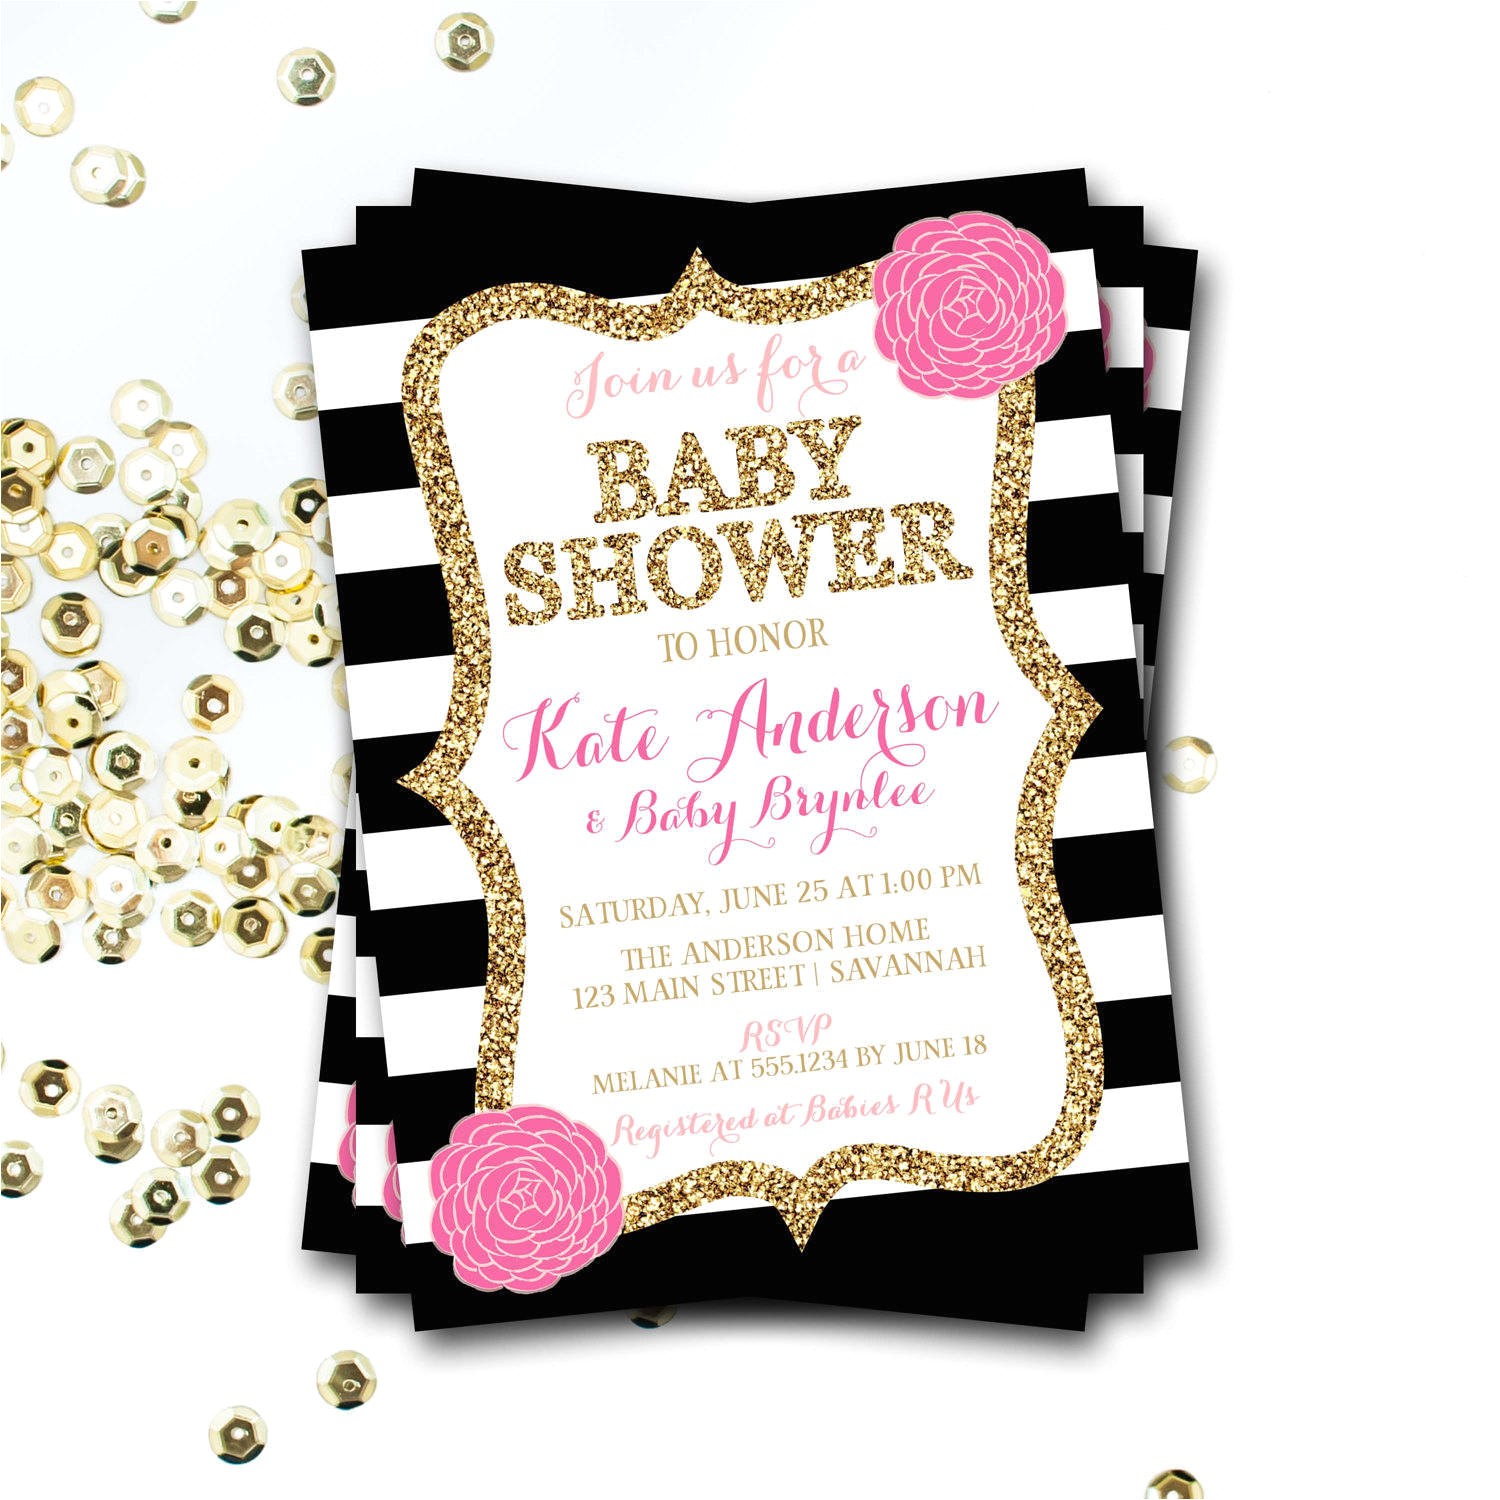 Red Black and Gold Baby Shower Invitations Pink Black and White Baby Shower Invitation Pink and